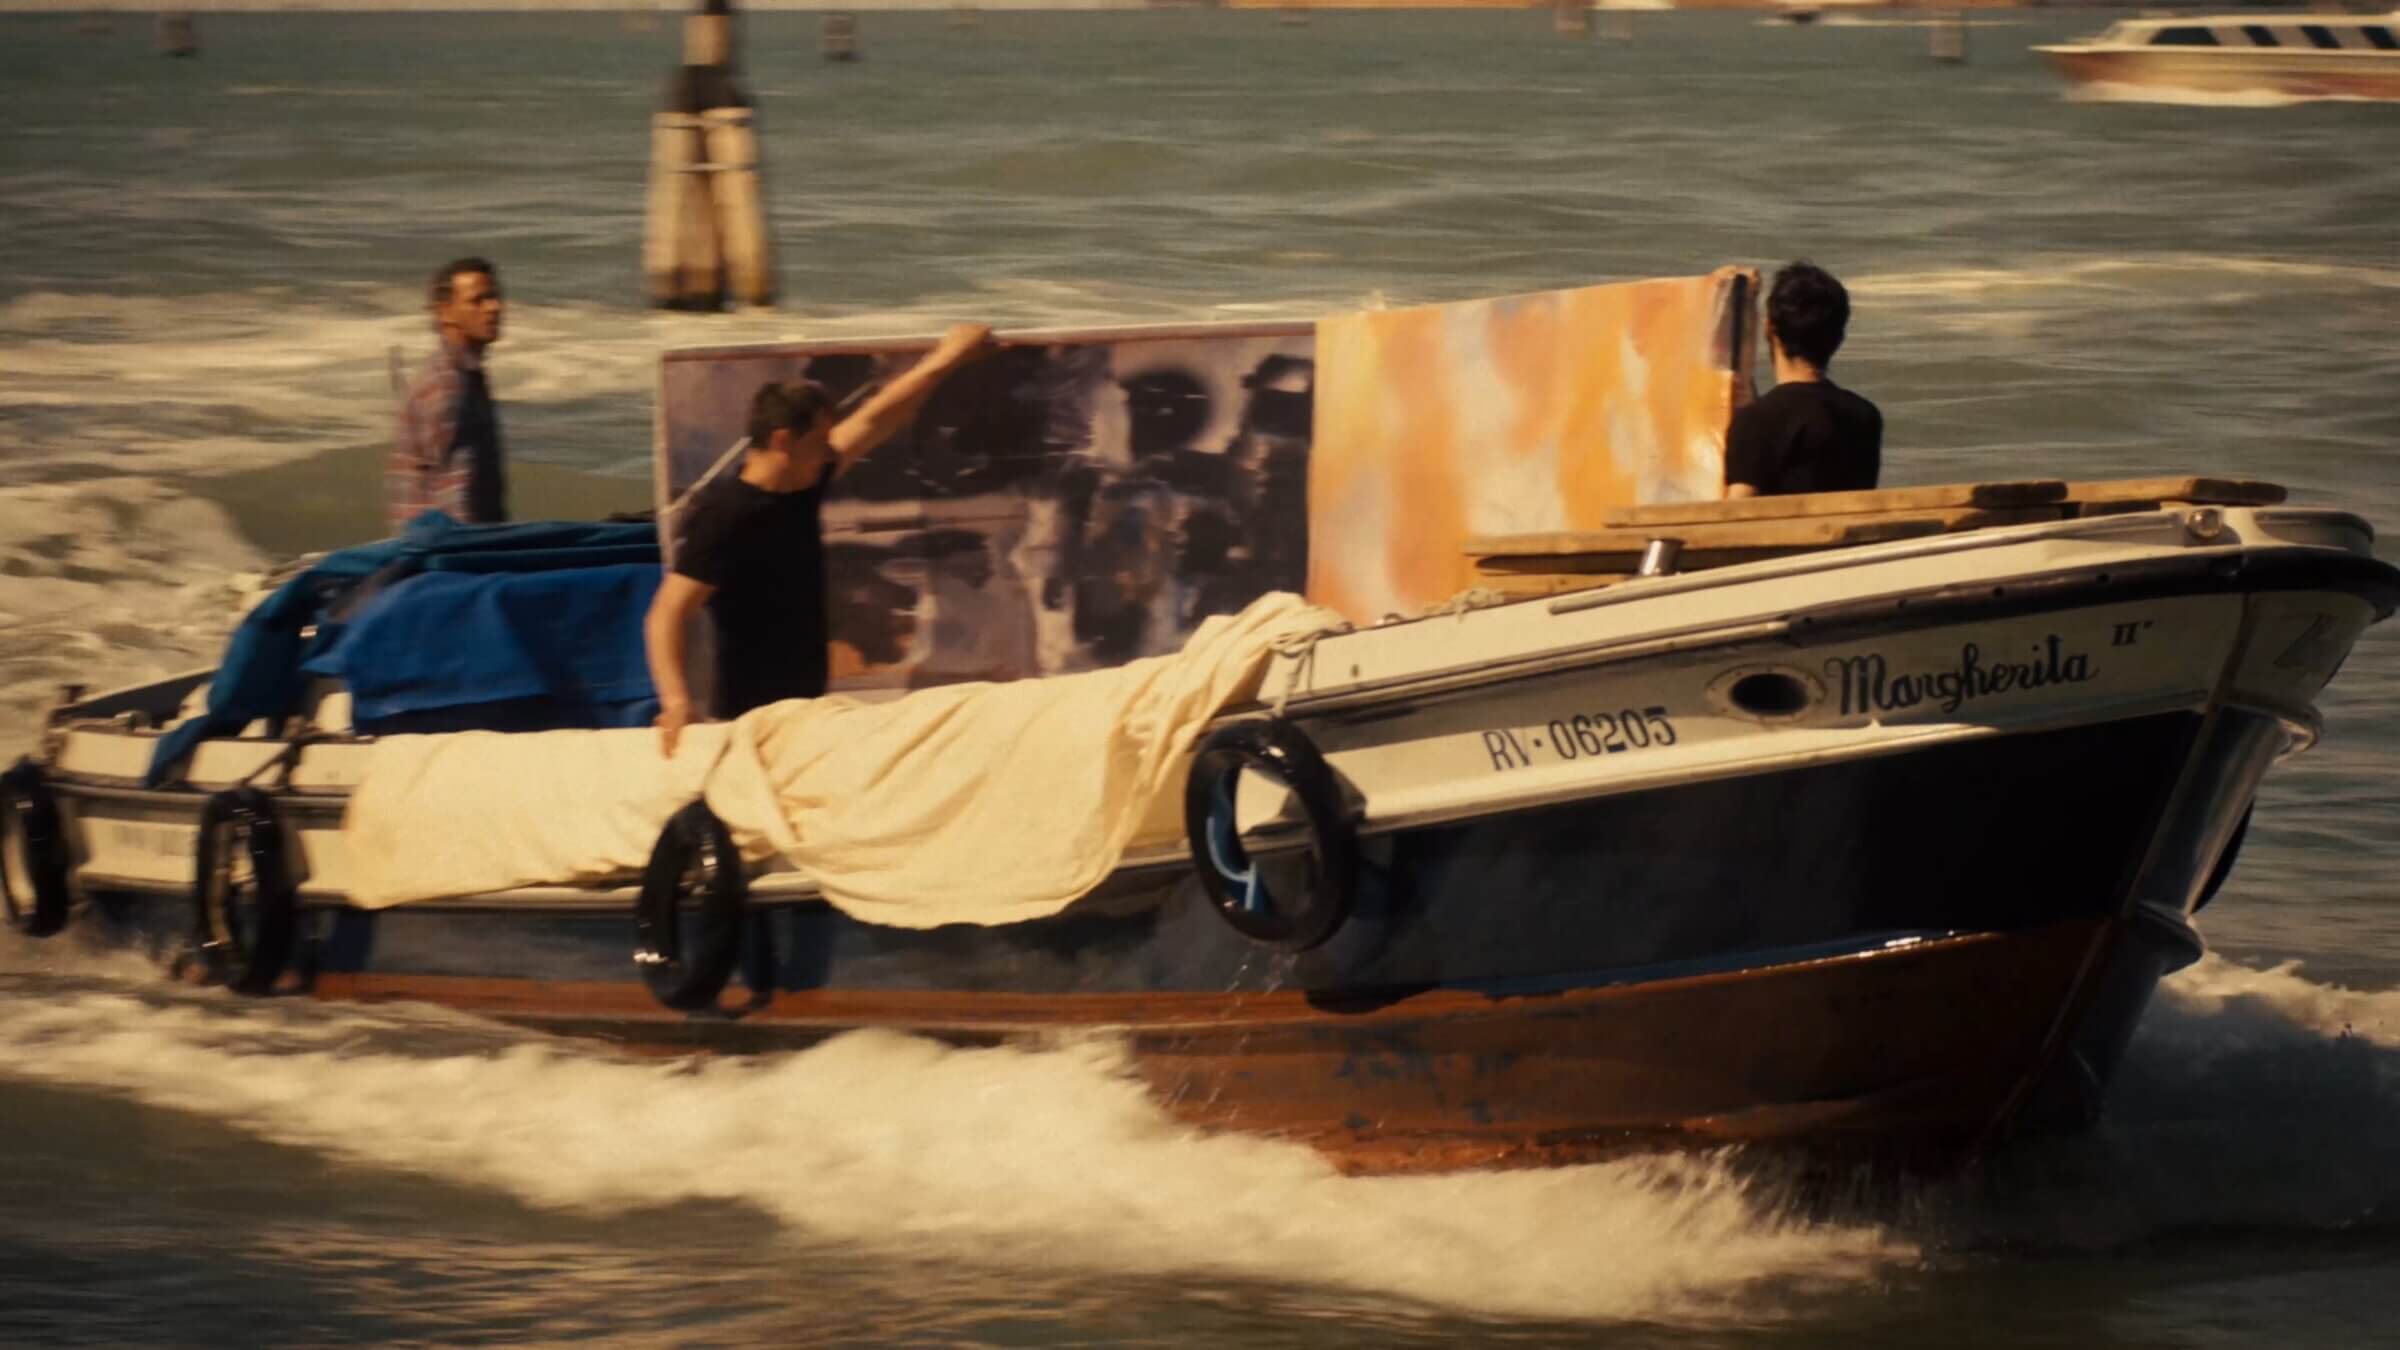 'Taking Venice' recreates the 1964 transport of Robert Rauschenberg’s work for exhibition at the 1964 Venice Biennale.